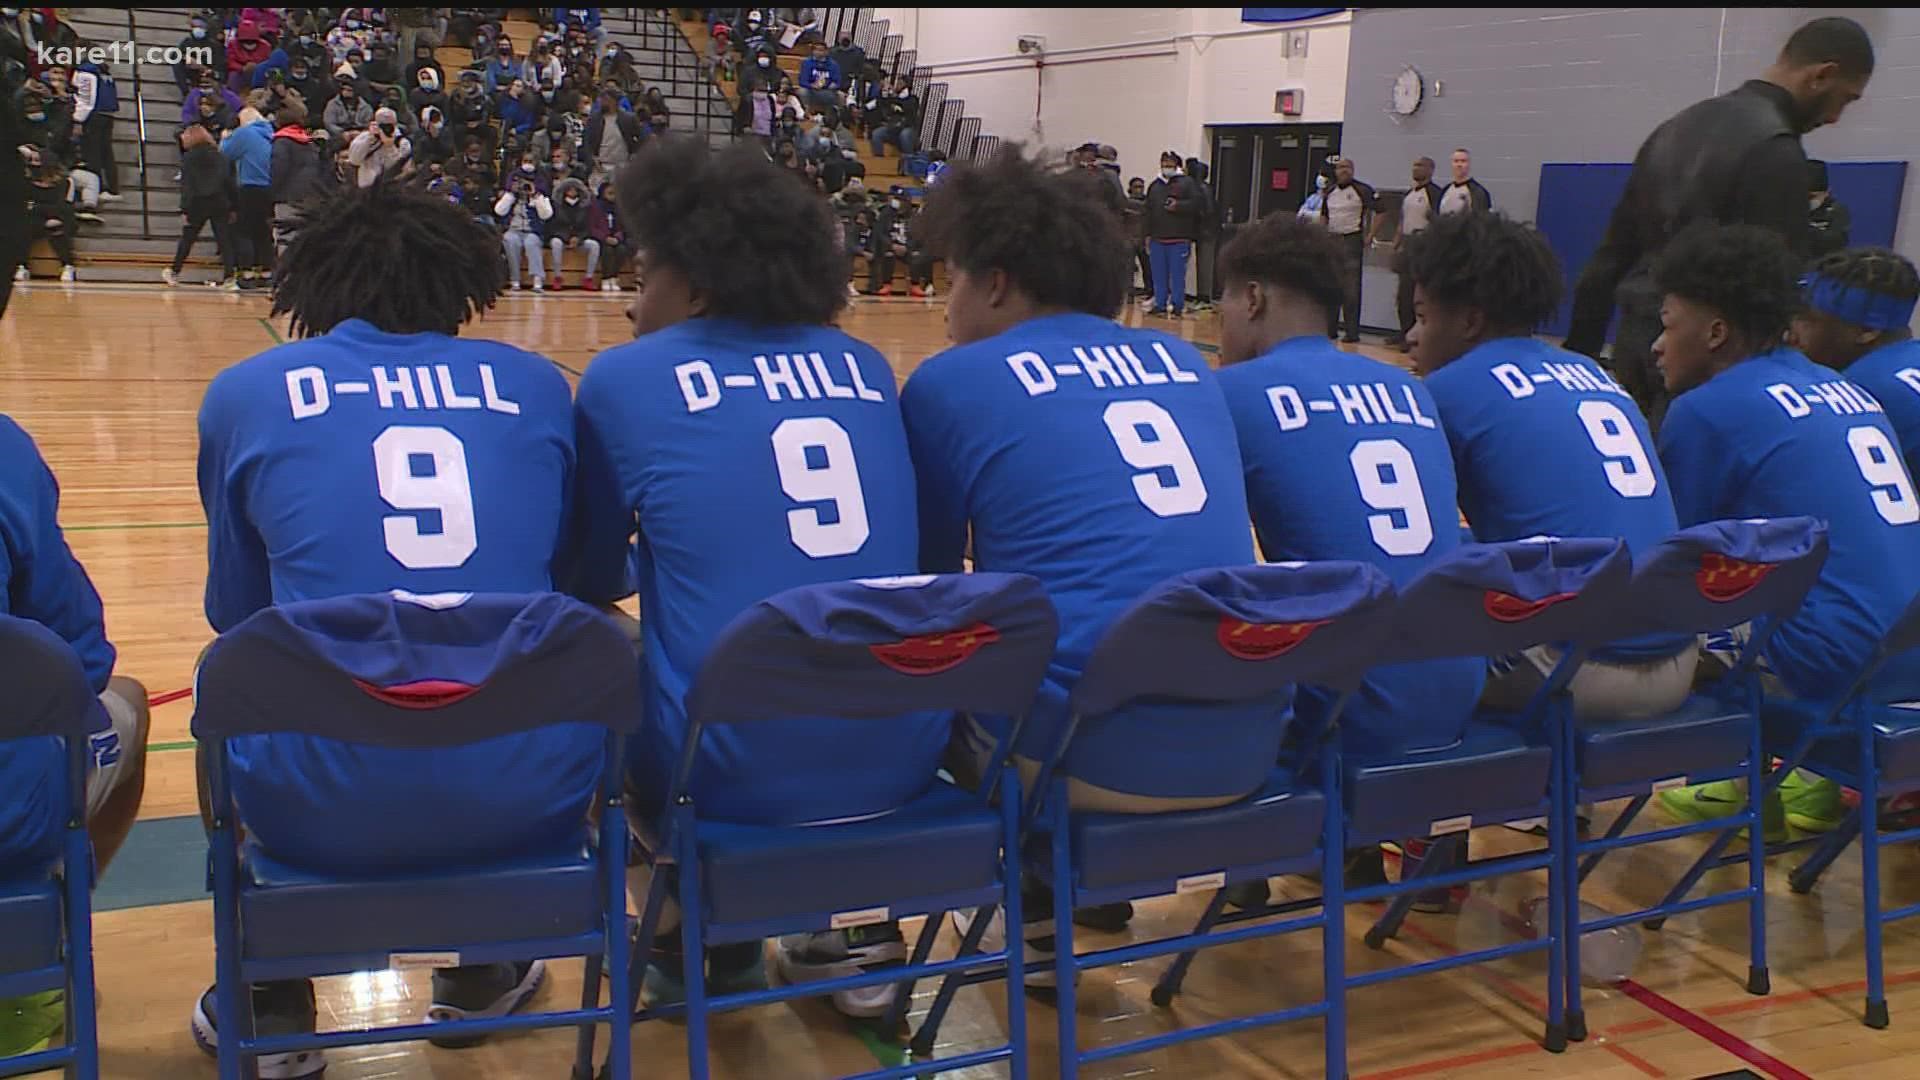 Hill's teammates wore warmup jerseys with his No. 9 on them, and his family was welcomed into the gym with a standing ovation as the crowd chanted "D-Hill."